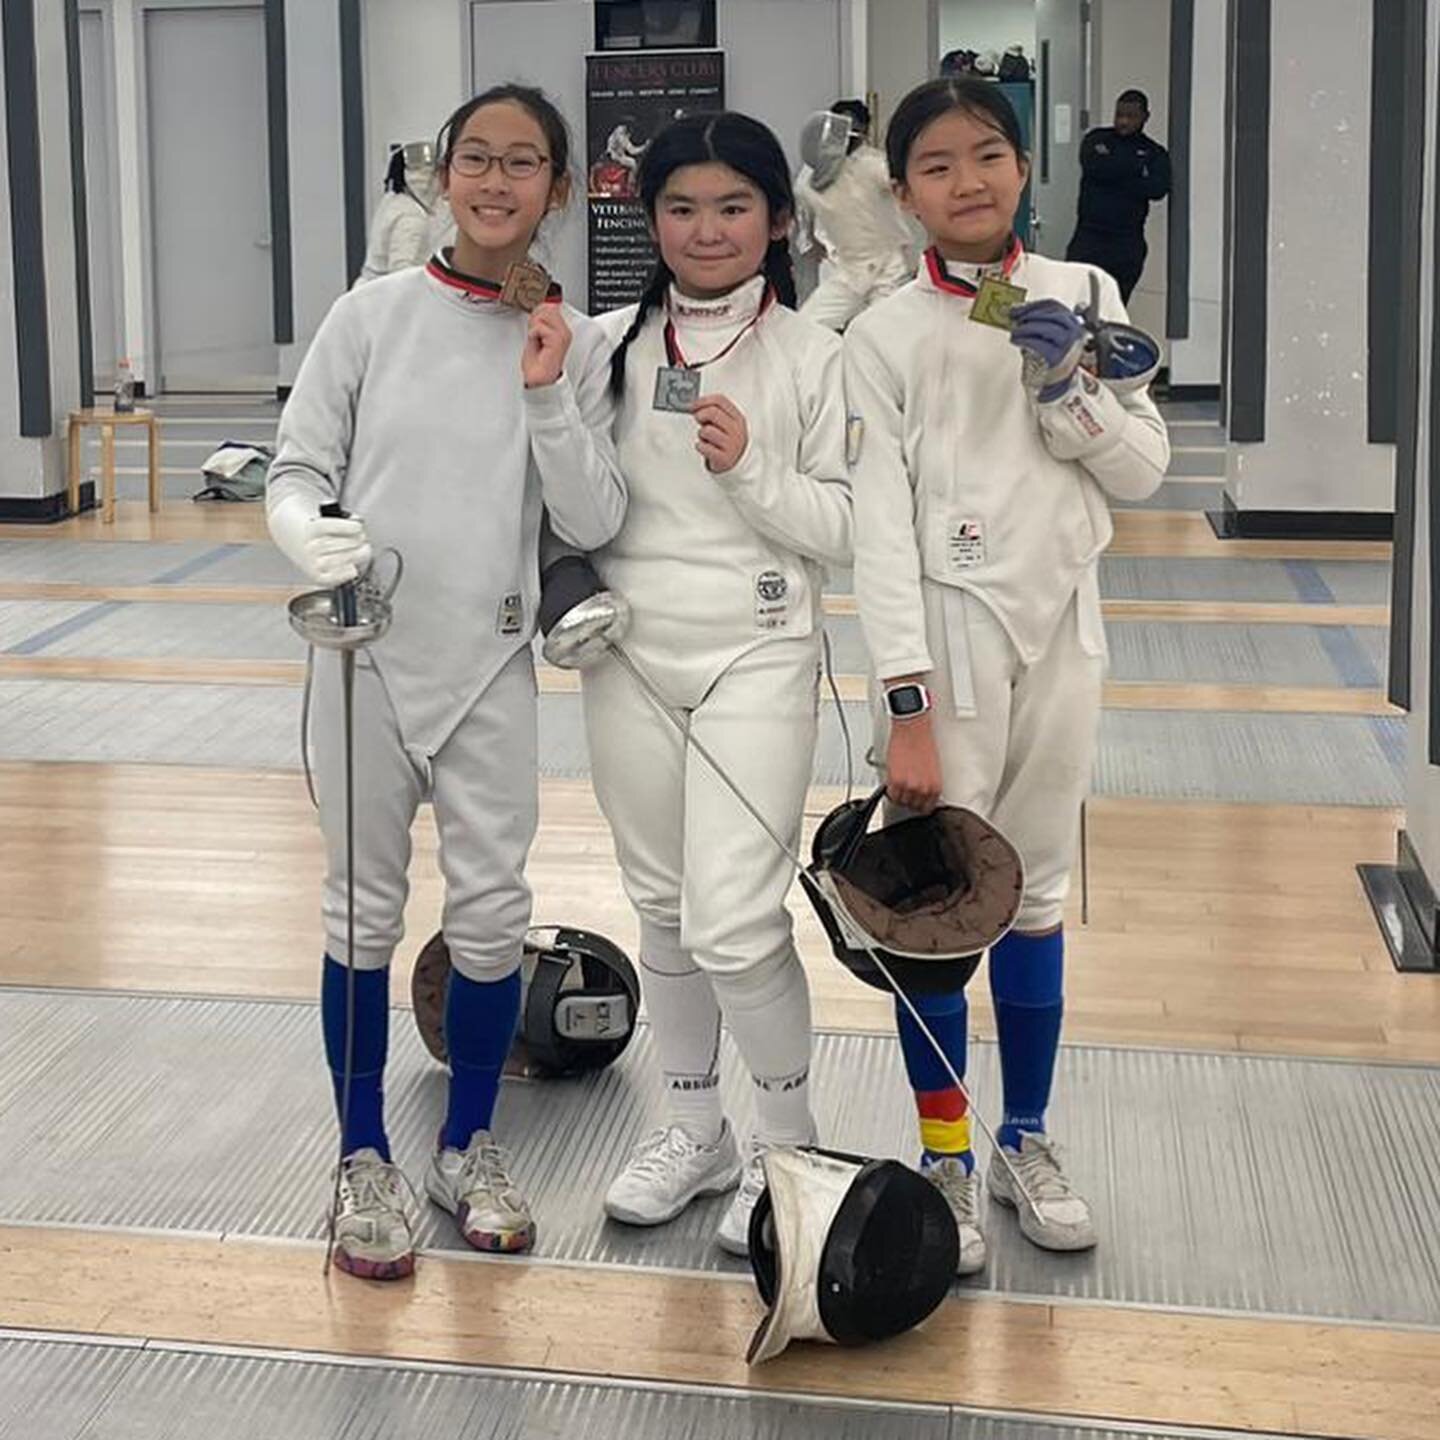 Elite FC had a very fun and productive day of competitions at Fencers Club! Congratulations to all the medalists and everyone who competed! 🏆🏅🎉

Evelyn Zhong - 1st place Y14 and 2nd place Y12 🏆
Nico Ng - 1st place Y12 🏆
George Hartmann - 3rd pla